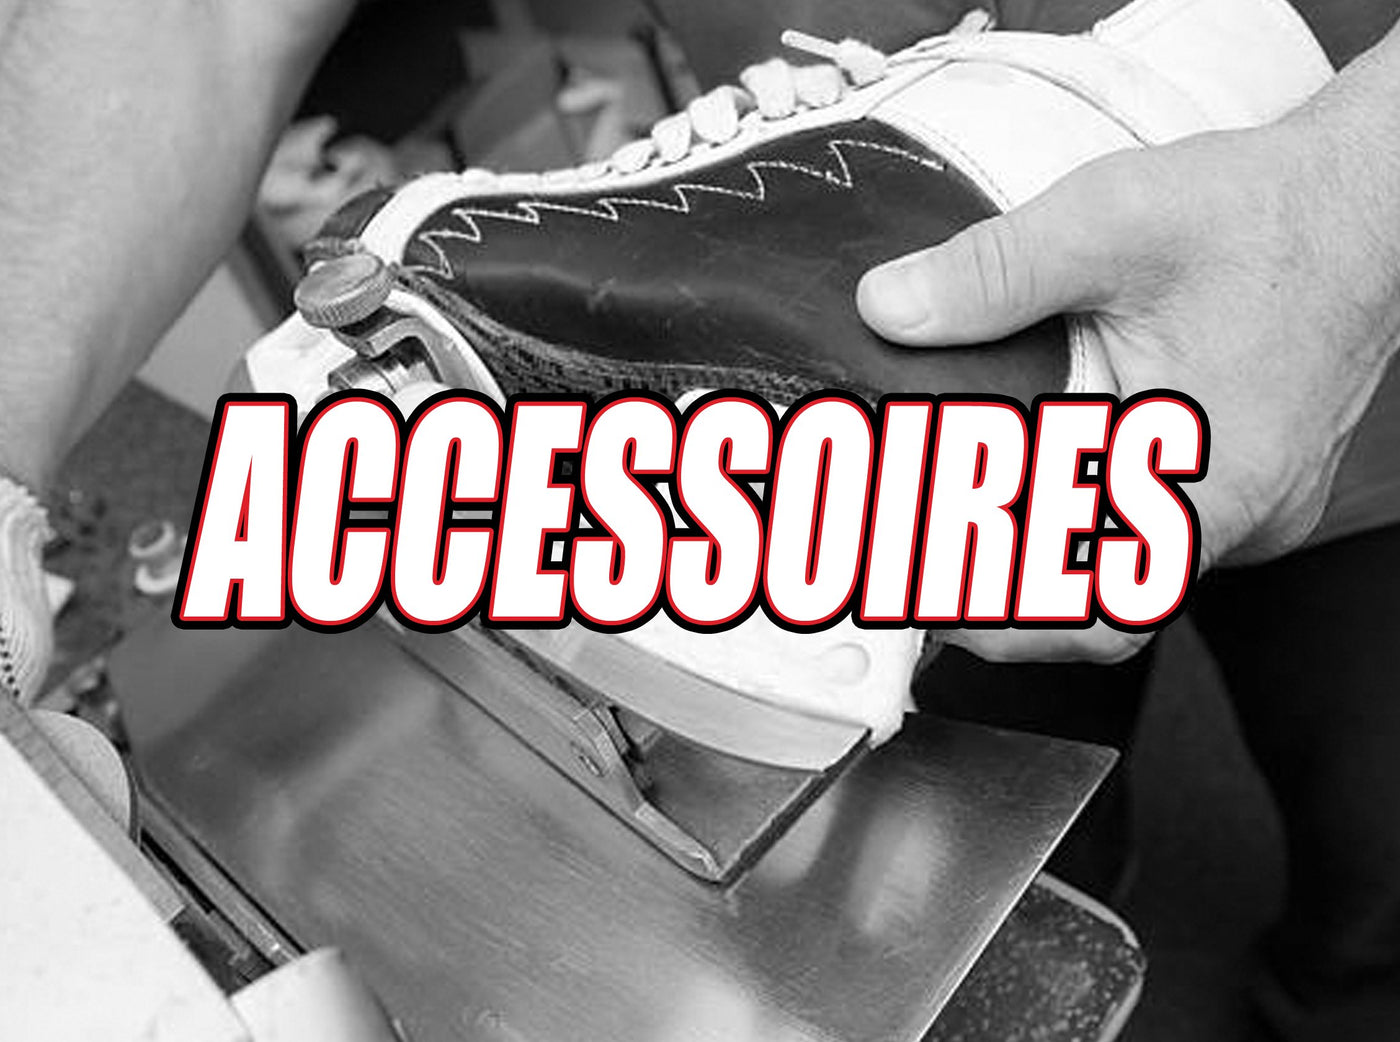 Hockey Patins Accessoires